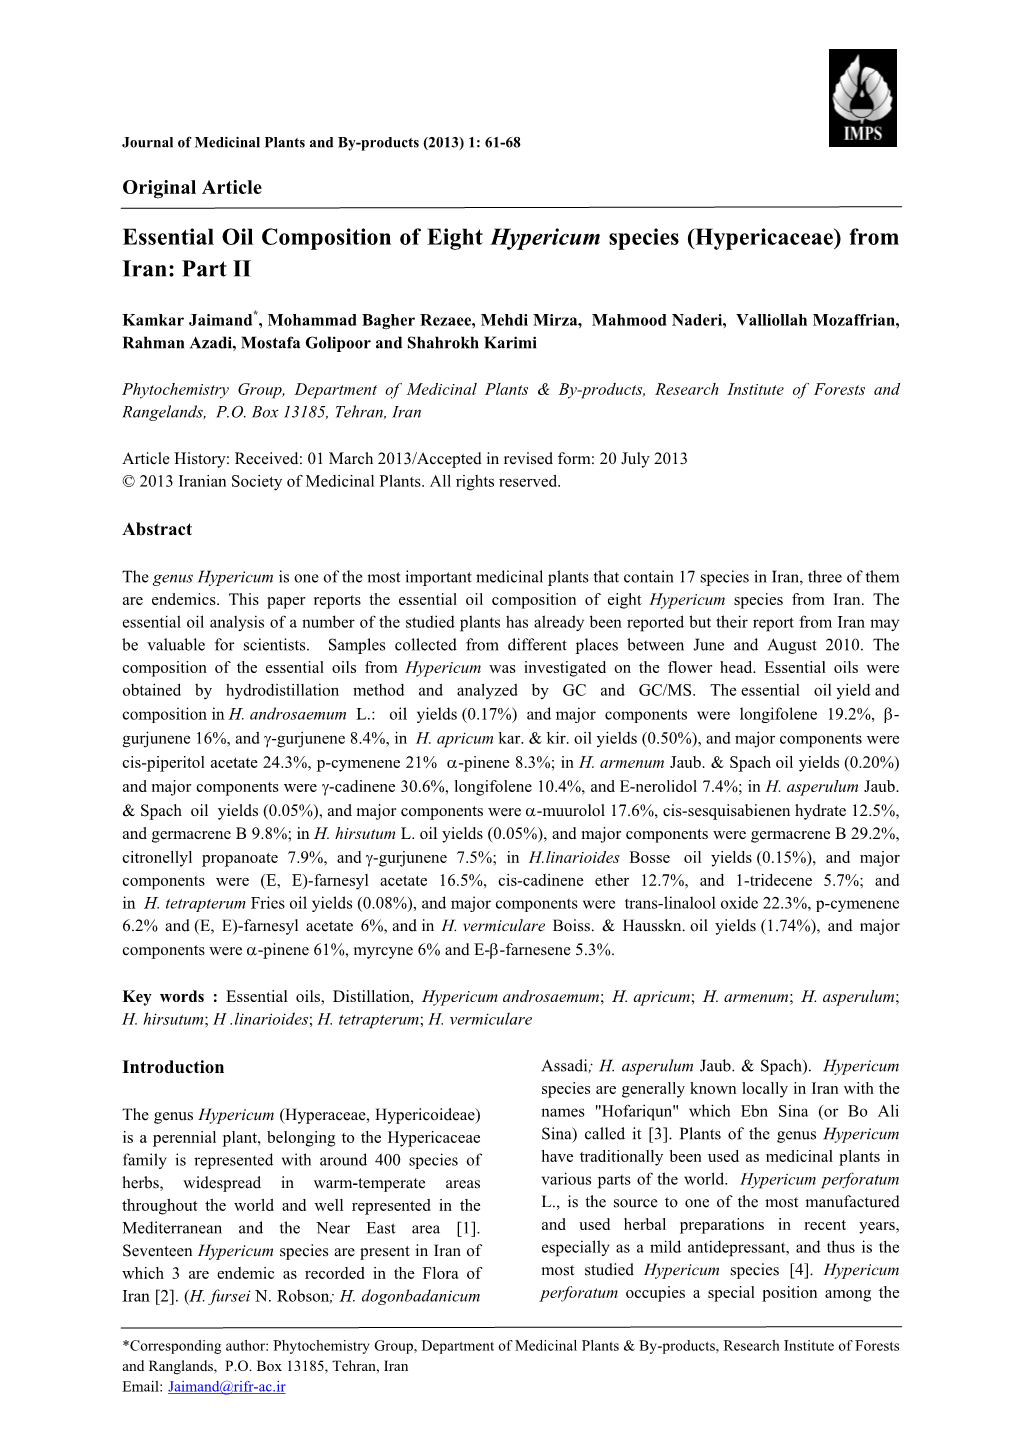 Essential Oil Composition of Eight Hypericum Species (Hypericaceae) from Iran: Part II